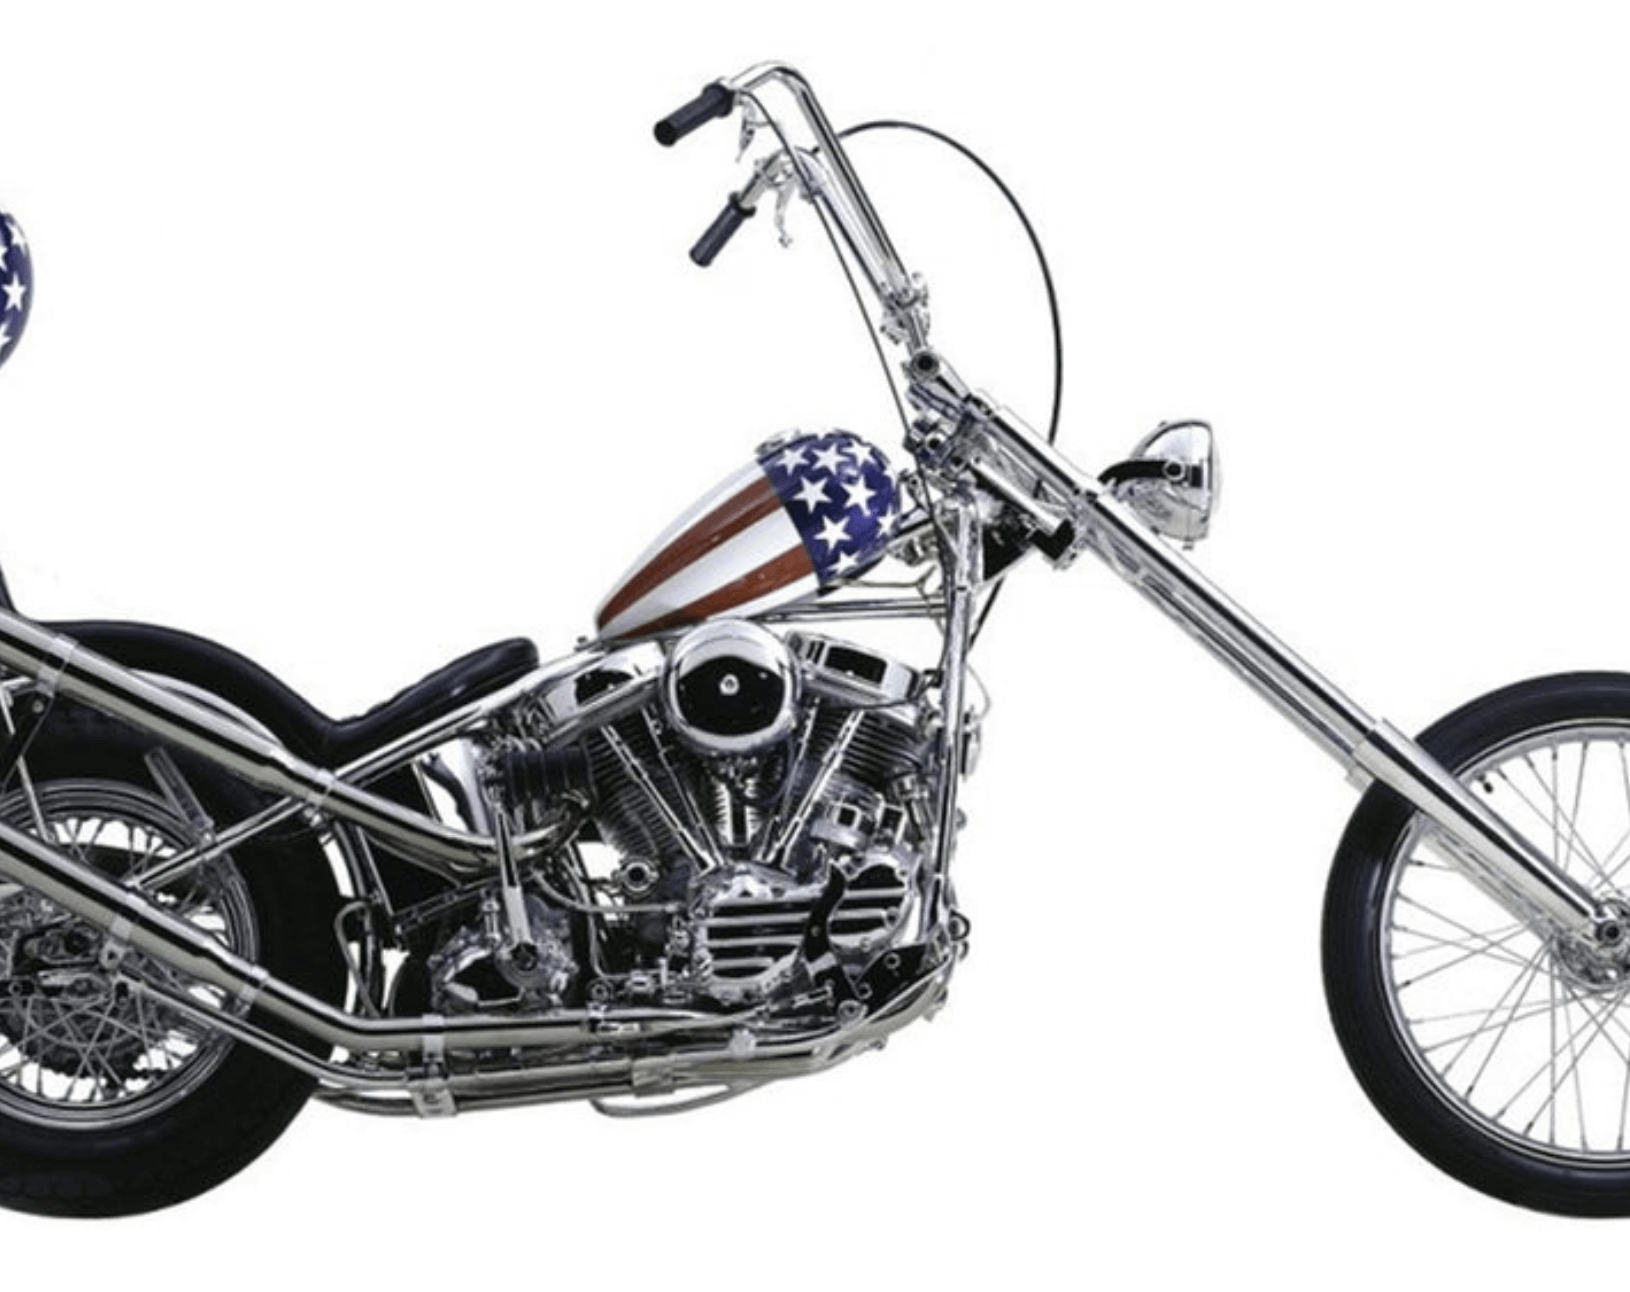 Kollies Parts Blog - What's a Bobber and what's a Chopper